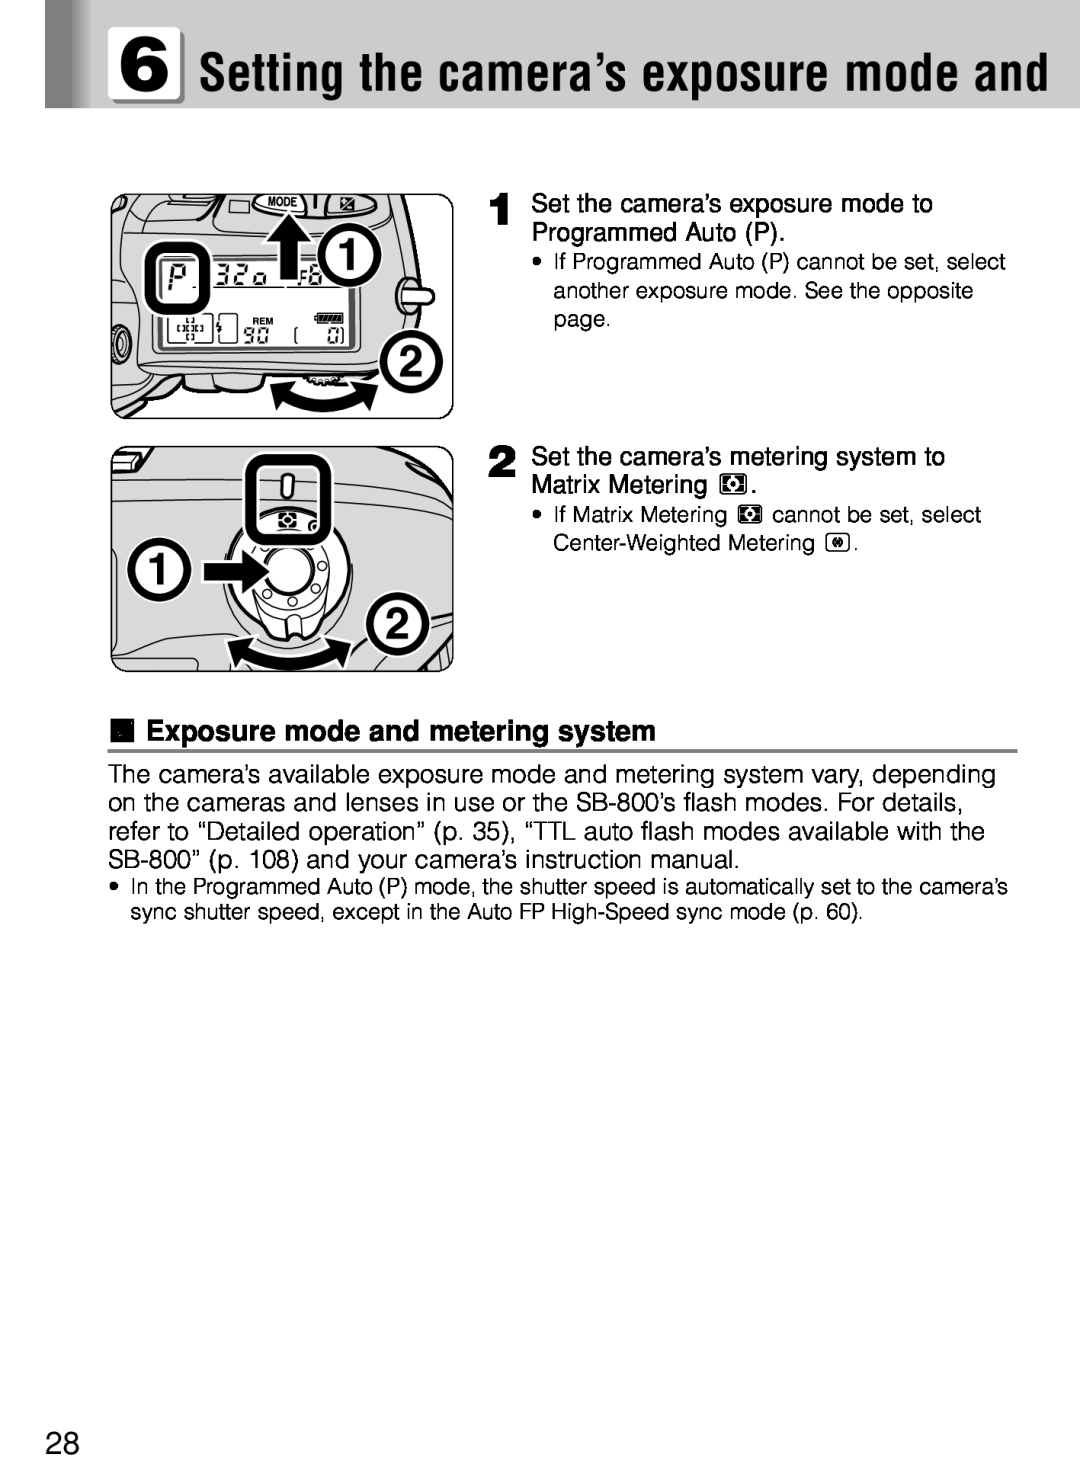 Nikon SB-800 instruction manual Setting the camera’s exposure mode and, t Exposure mode and metering system 